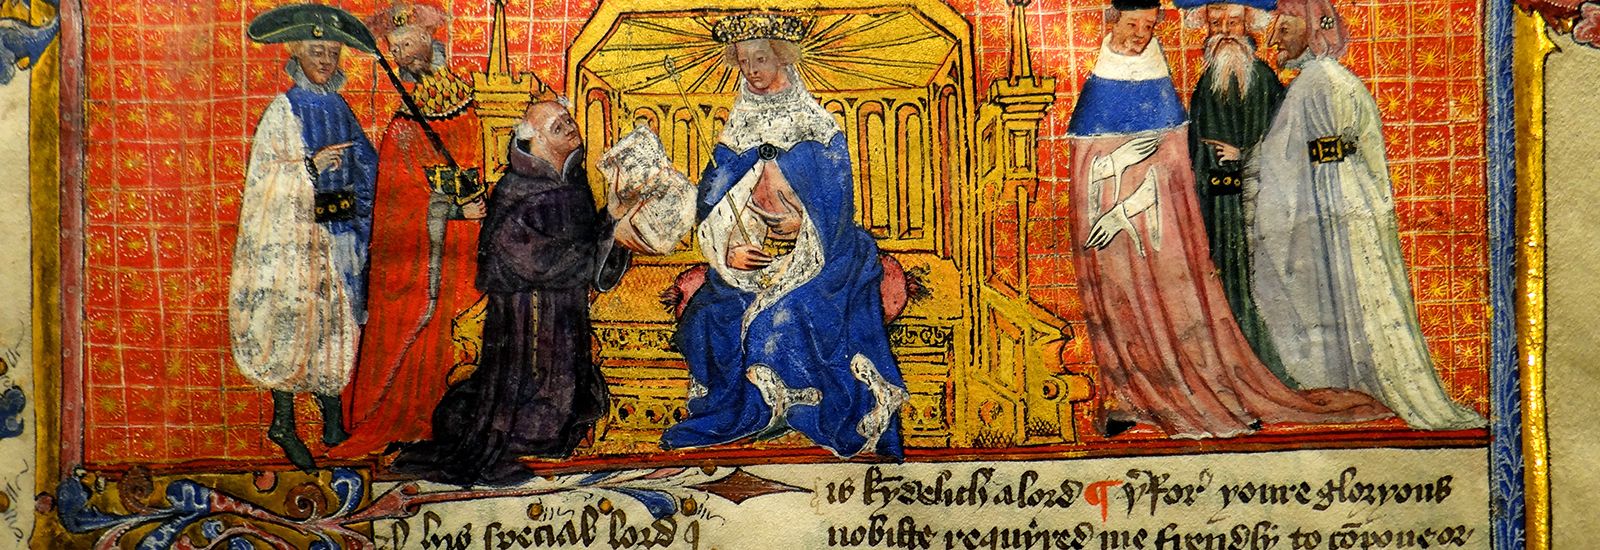 A close up of a painting manuscript showing 6 figures